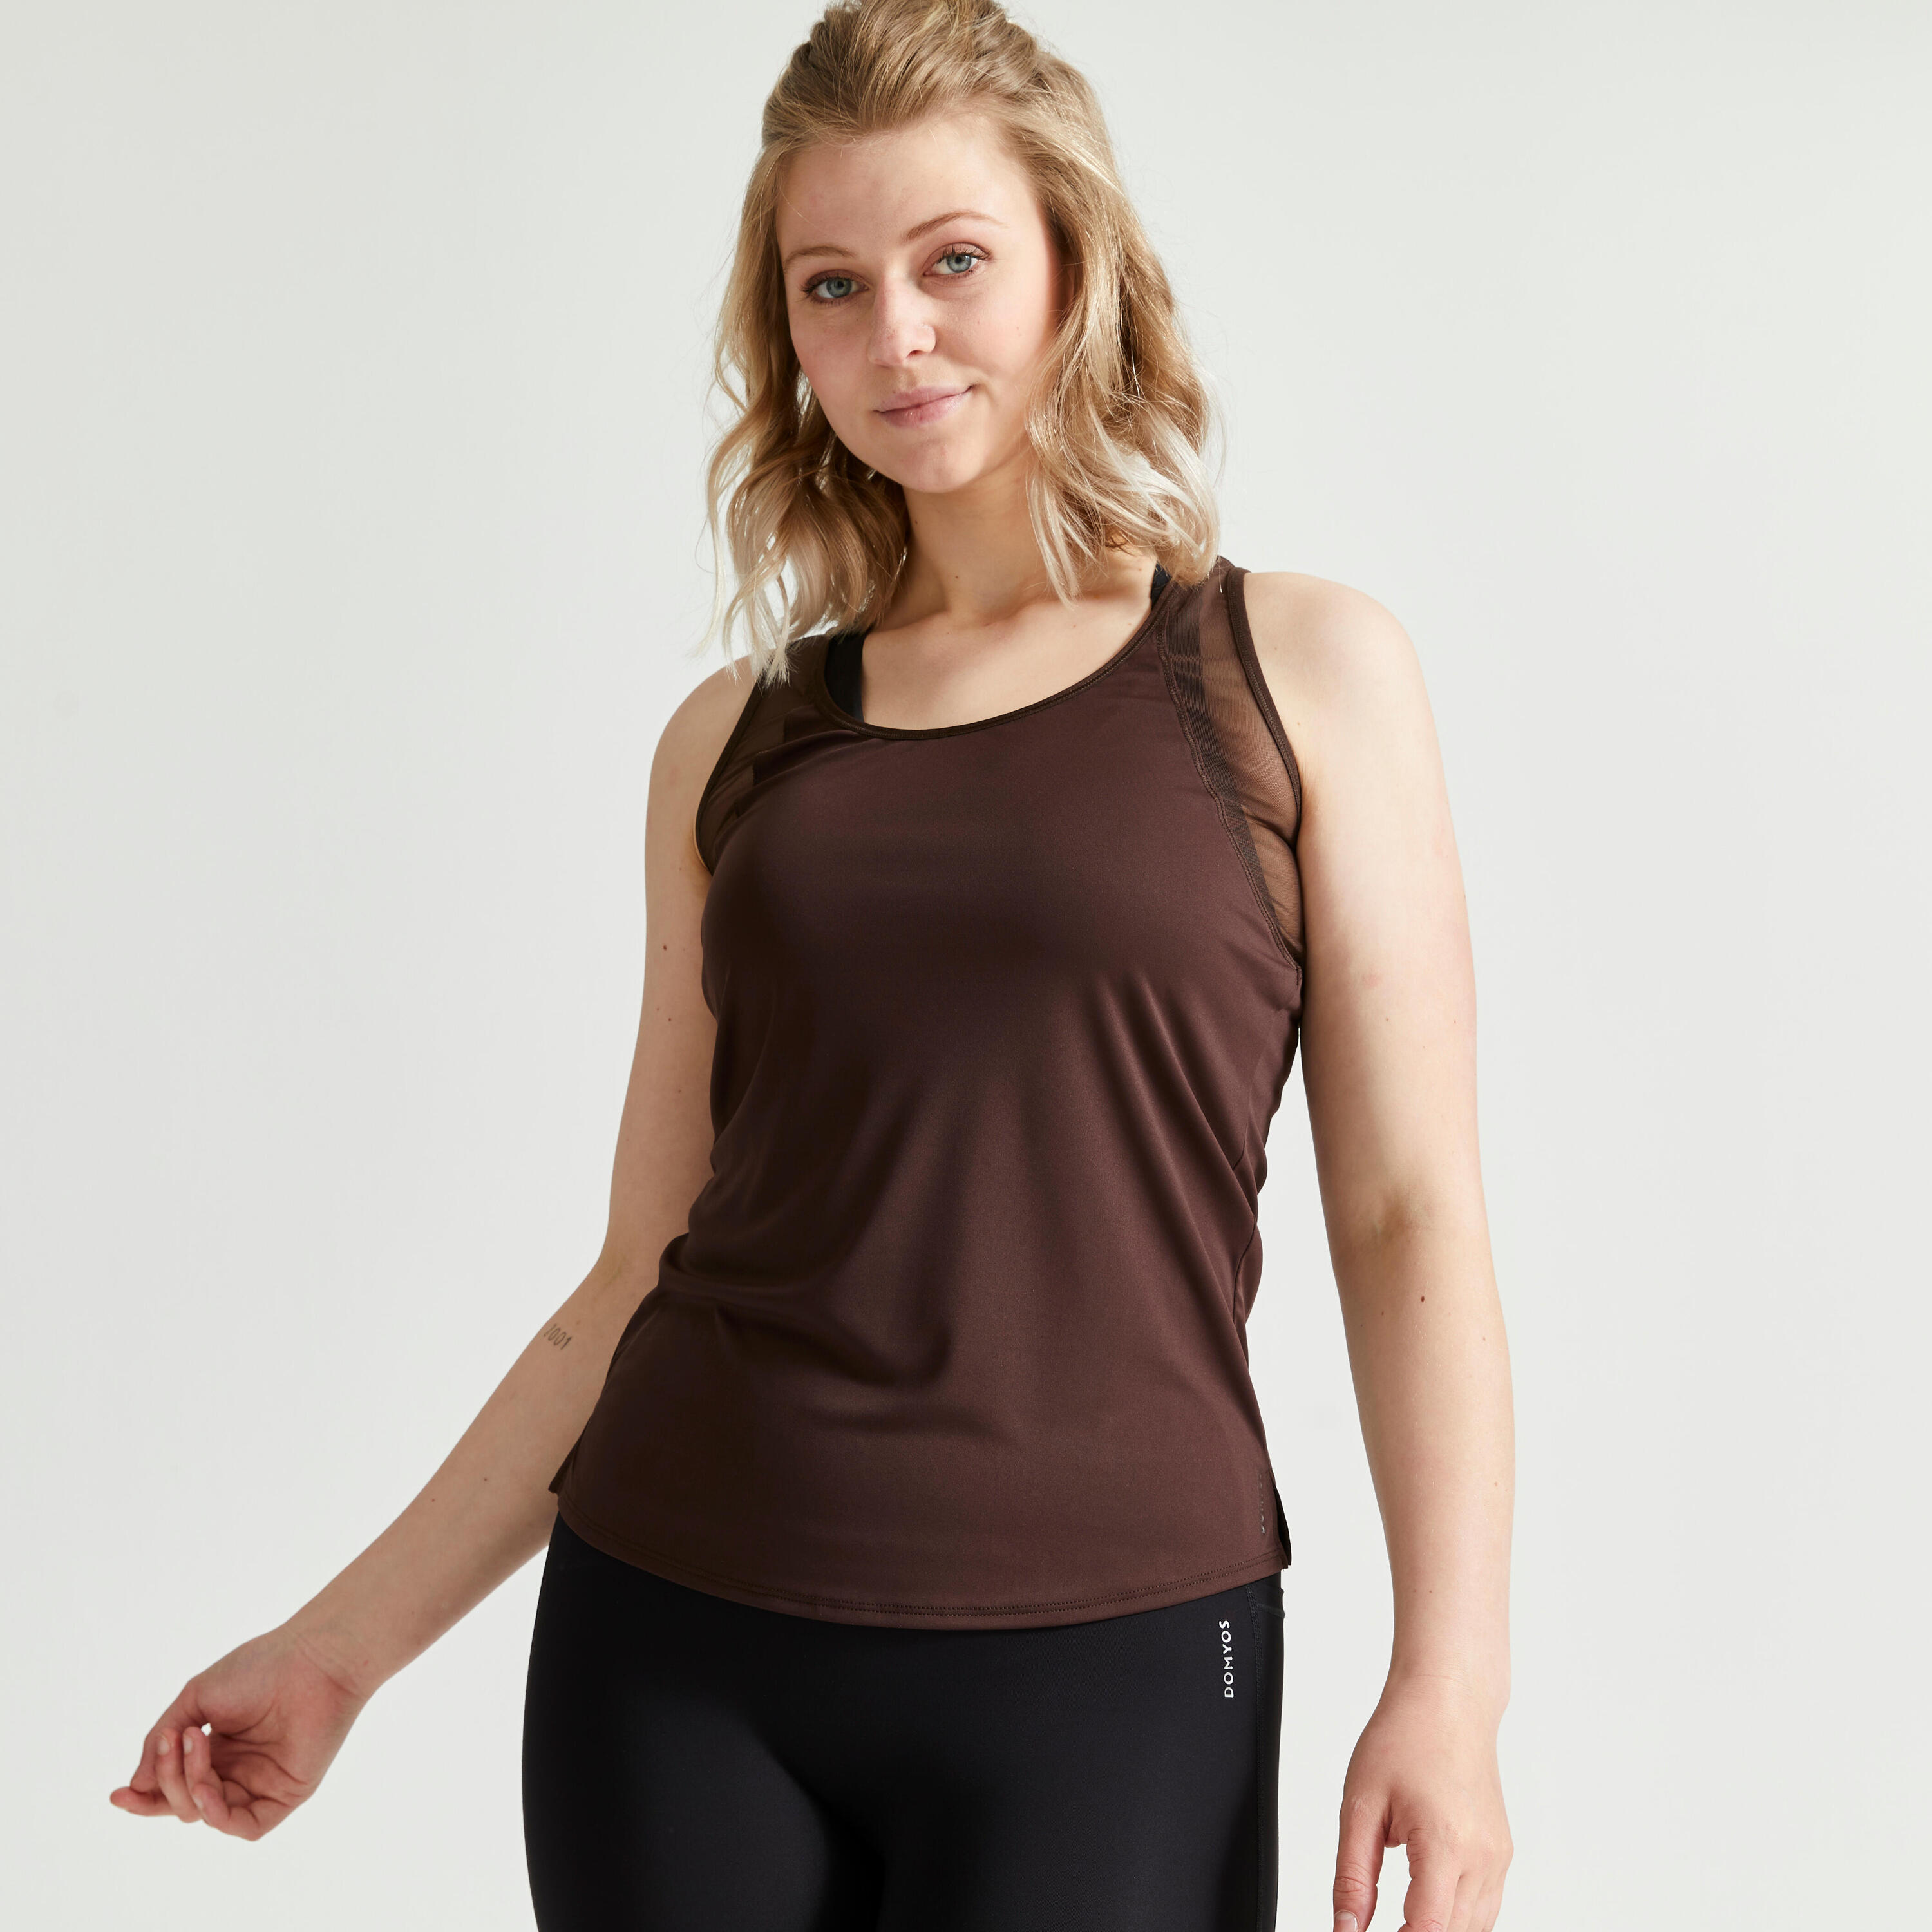 Women's Muscle Back Fitness Cardio Tank Top - Brown 1/5